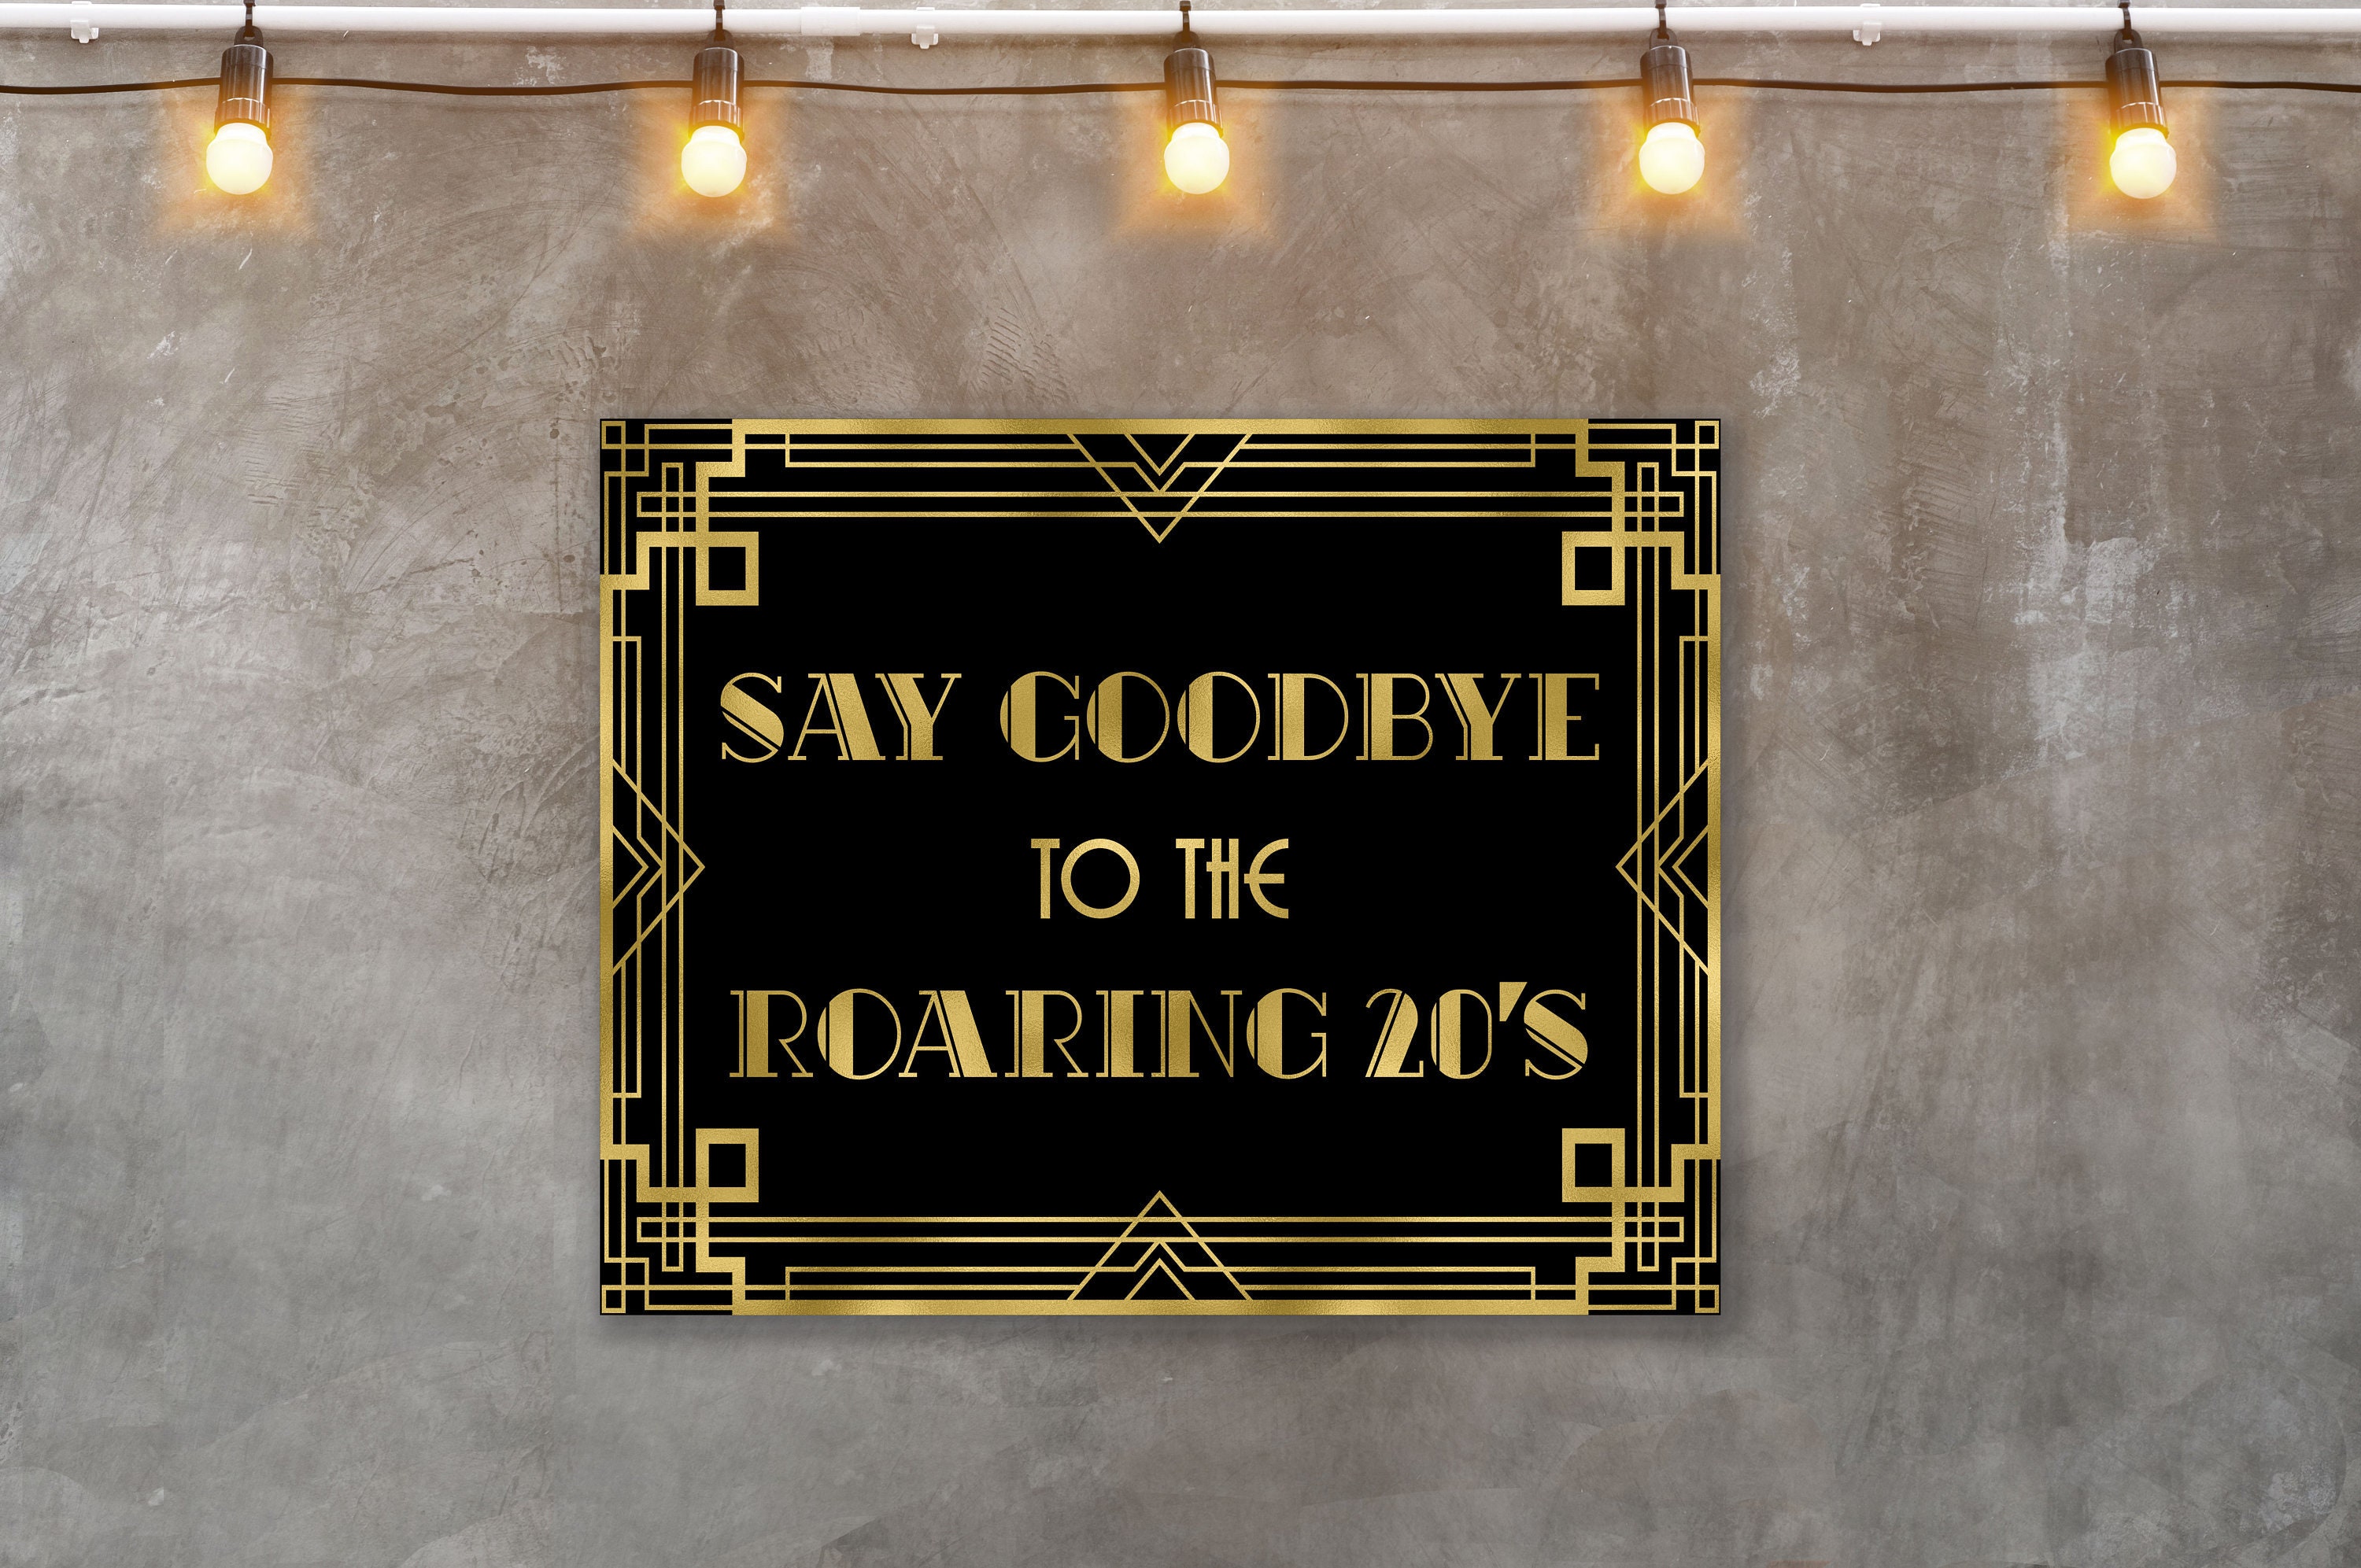 Decor for our goodbye roaring 20s birthday party we threw for friends.  1920s. Great Gatsby.